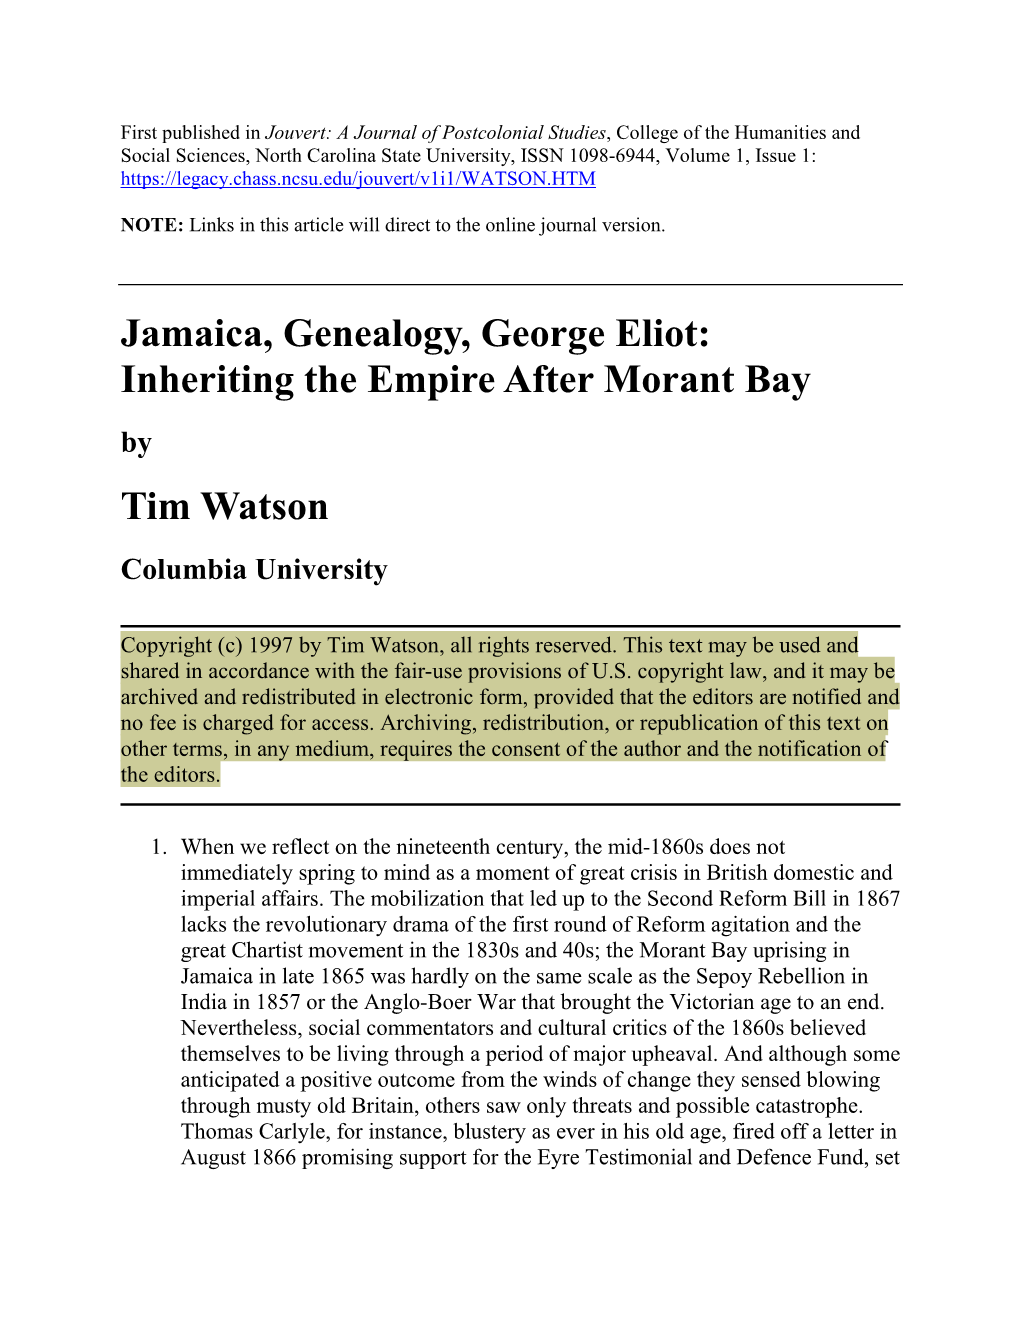 Jamaica, Genealogy, George Eliot: Inheriting the Empire After Morant Bay by Tim Watson Columbia University